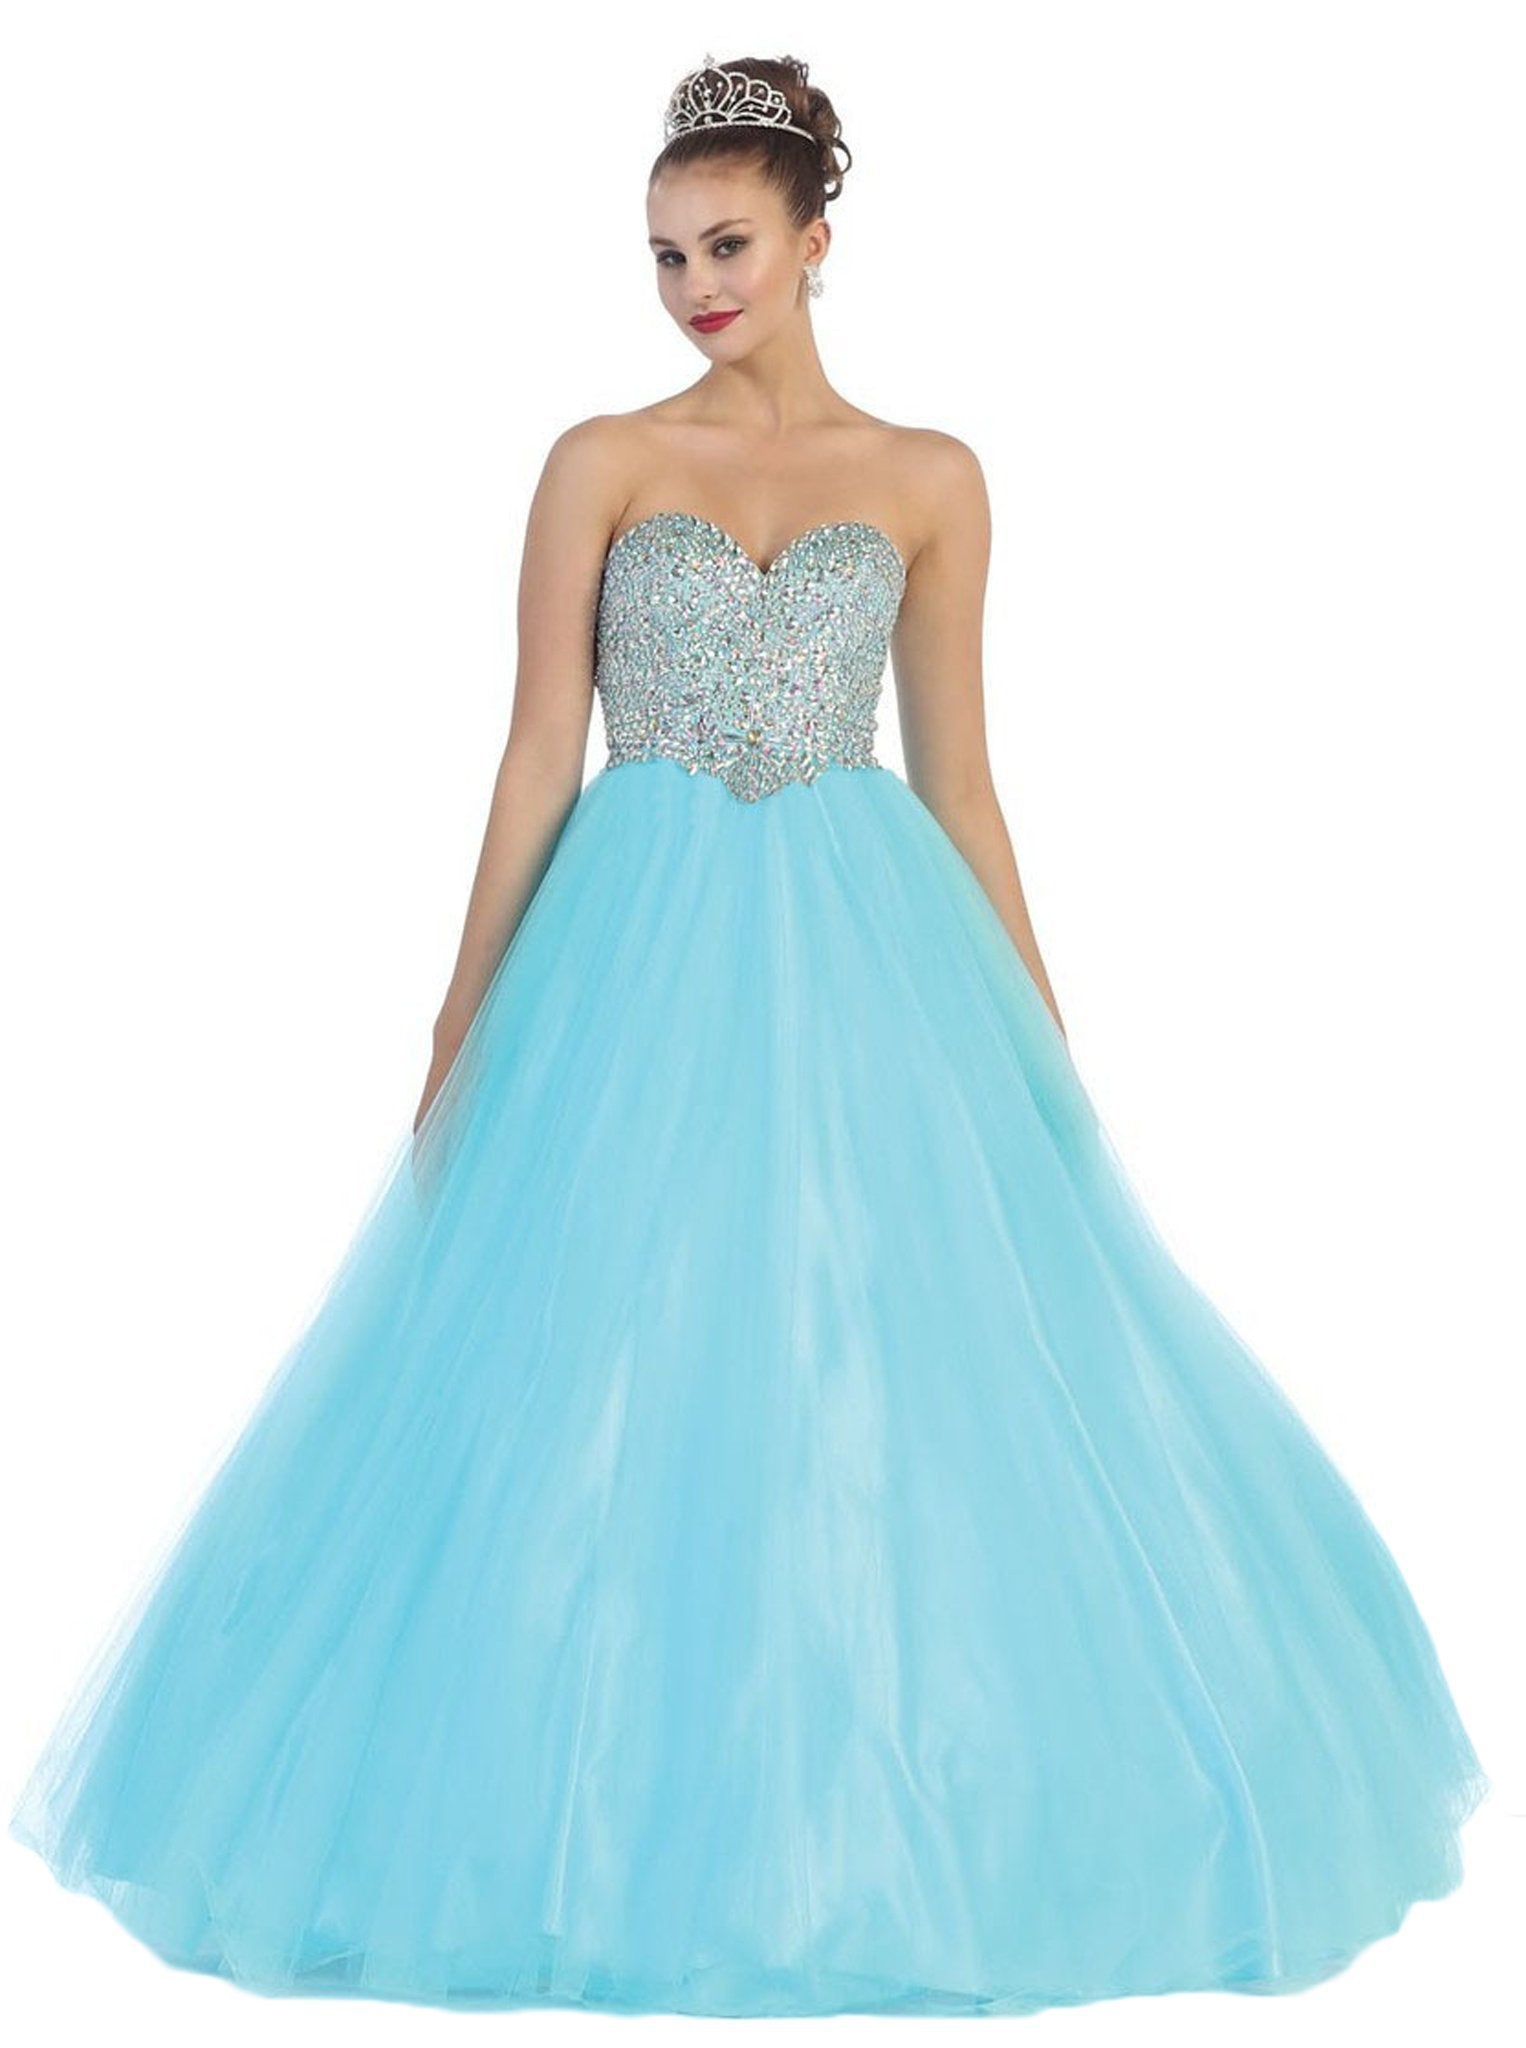 May Queen - Rhinestone Embellished Quinceanera Ballgown